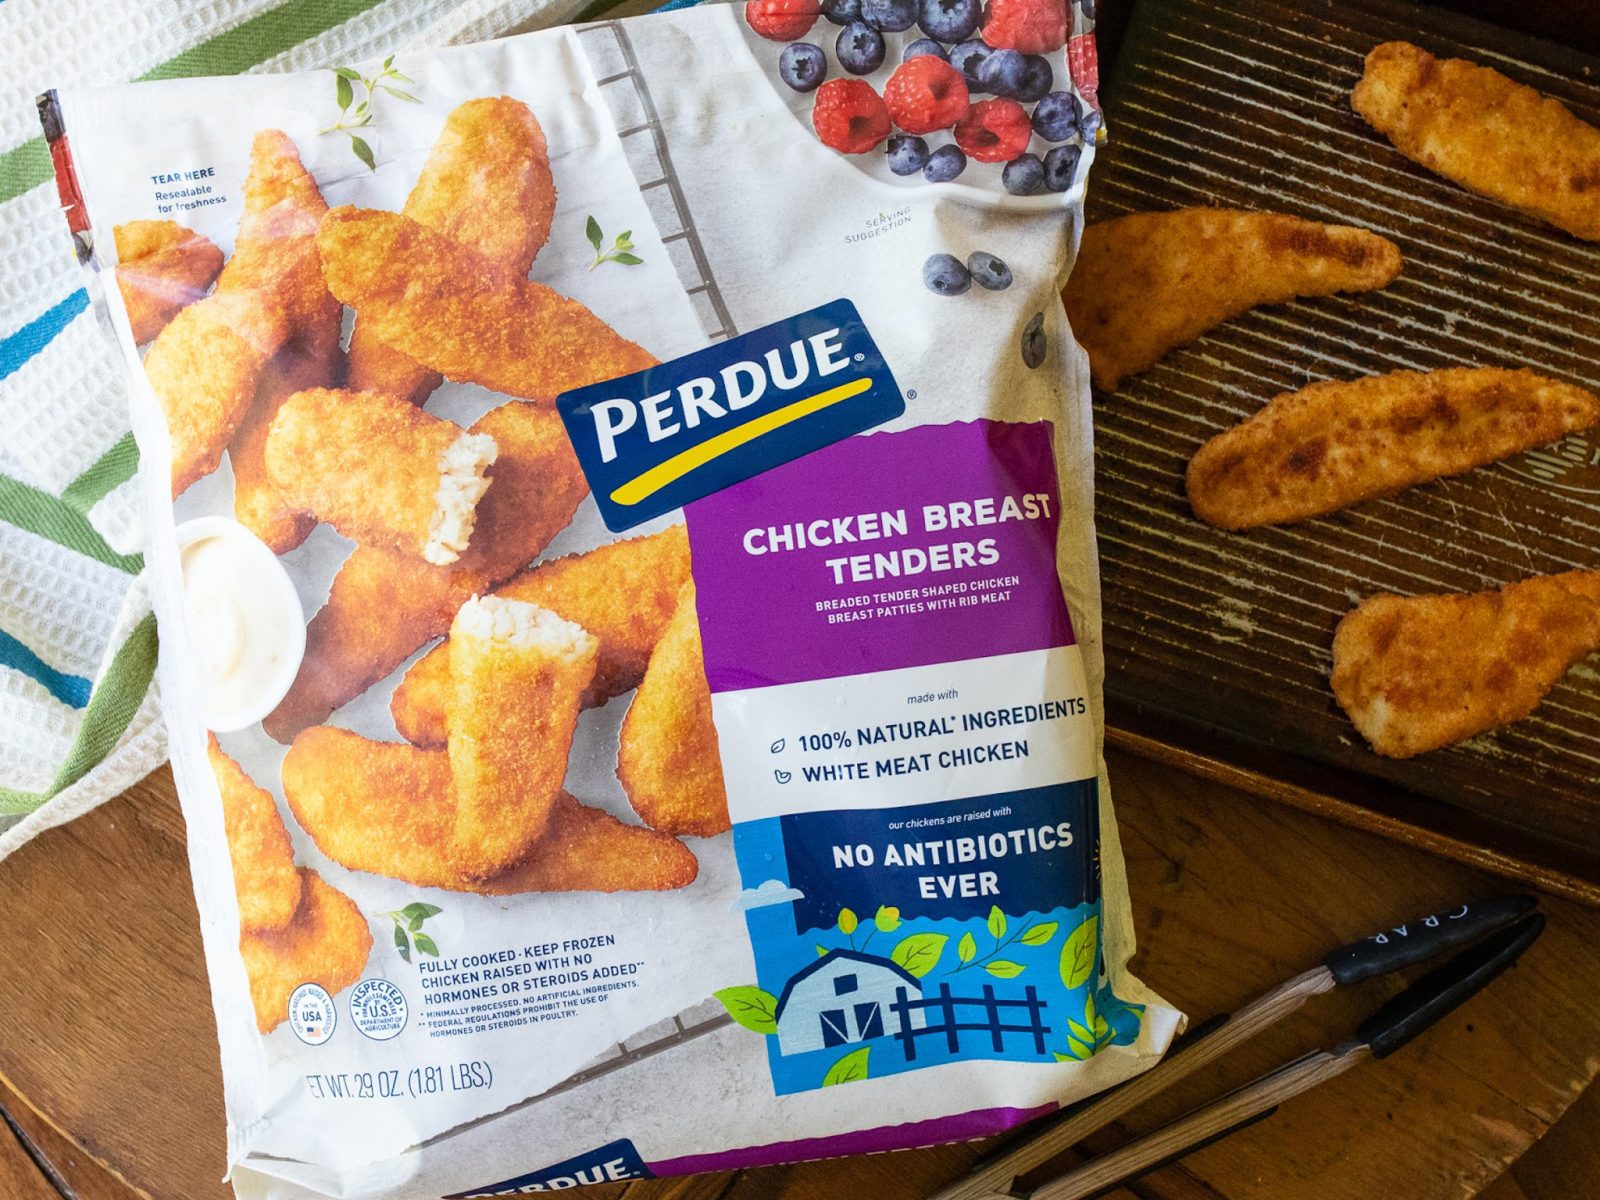 Nice Deal On Perdue Frozen Chicken – Get The Bags For Just $4.99 At Kroger (Regular Price $8.29)